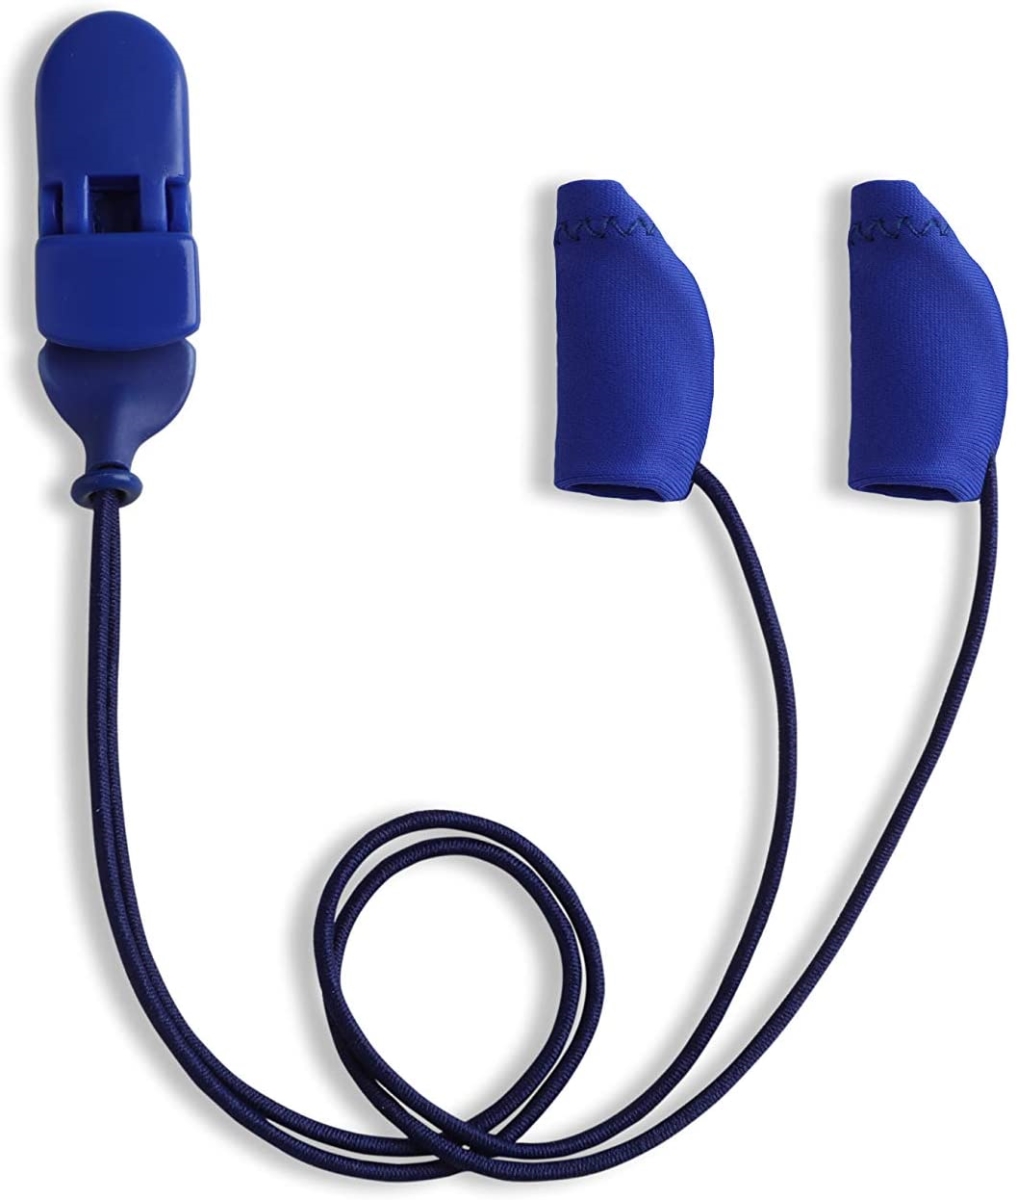 Picture of Ear Gear EG-MICROCORD-BL 1 in. Micro Corded Binaural Hearing Aids Protectors, Blue